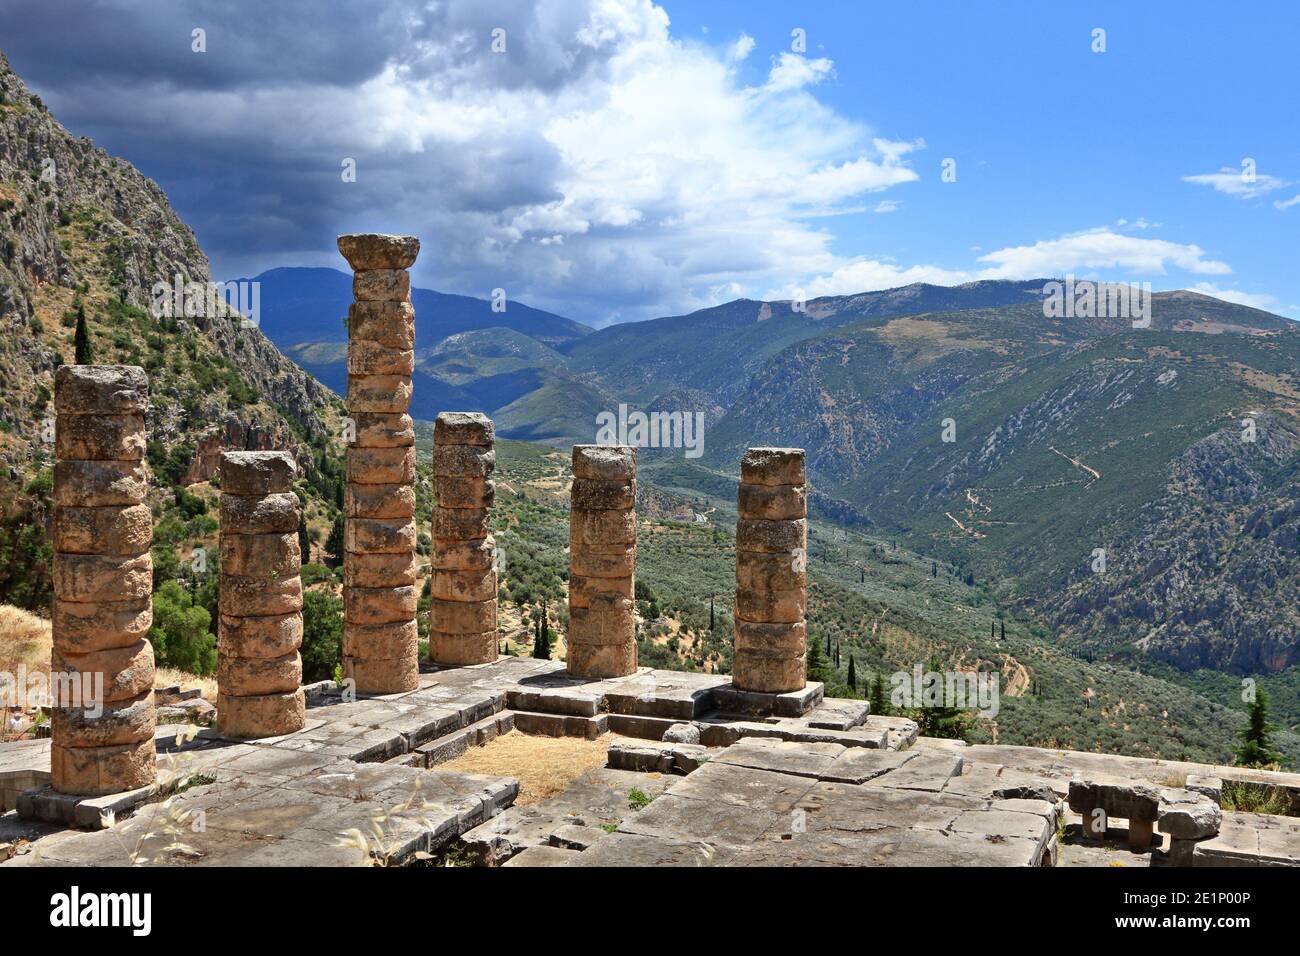 The temple of Apollo at ancient Delphi, the 'navel' and most important oracle of the ancient world, Fokida, Central Greece. Stock Photo